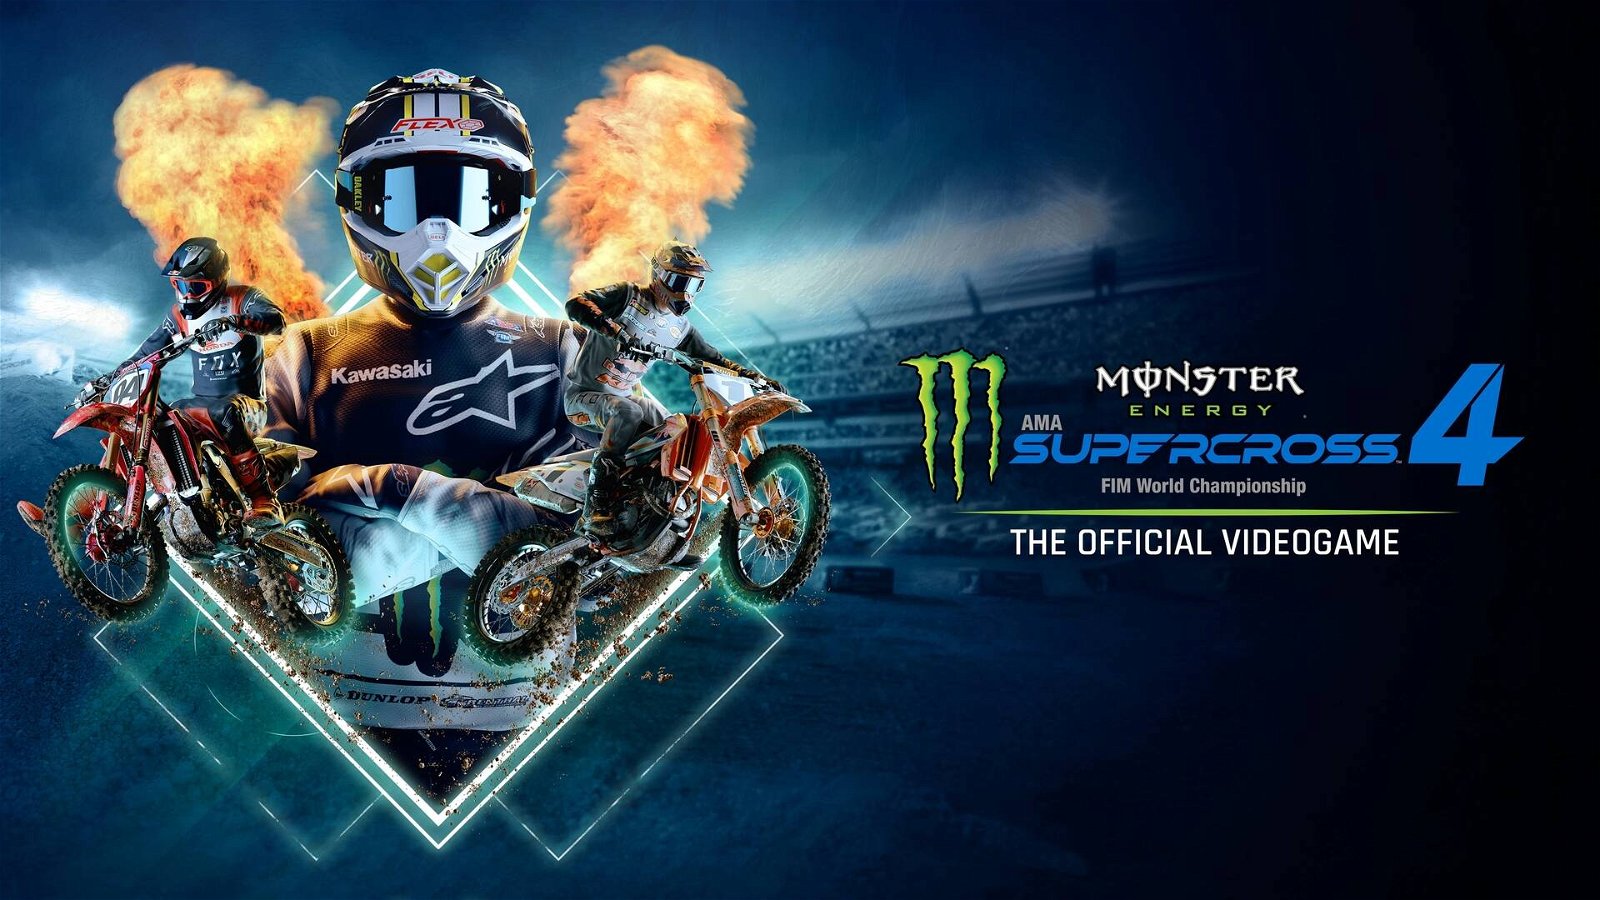 Immagine di Monster Energy Supercross - The Official Videogame 4 | Anteprima